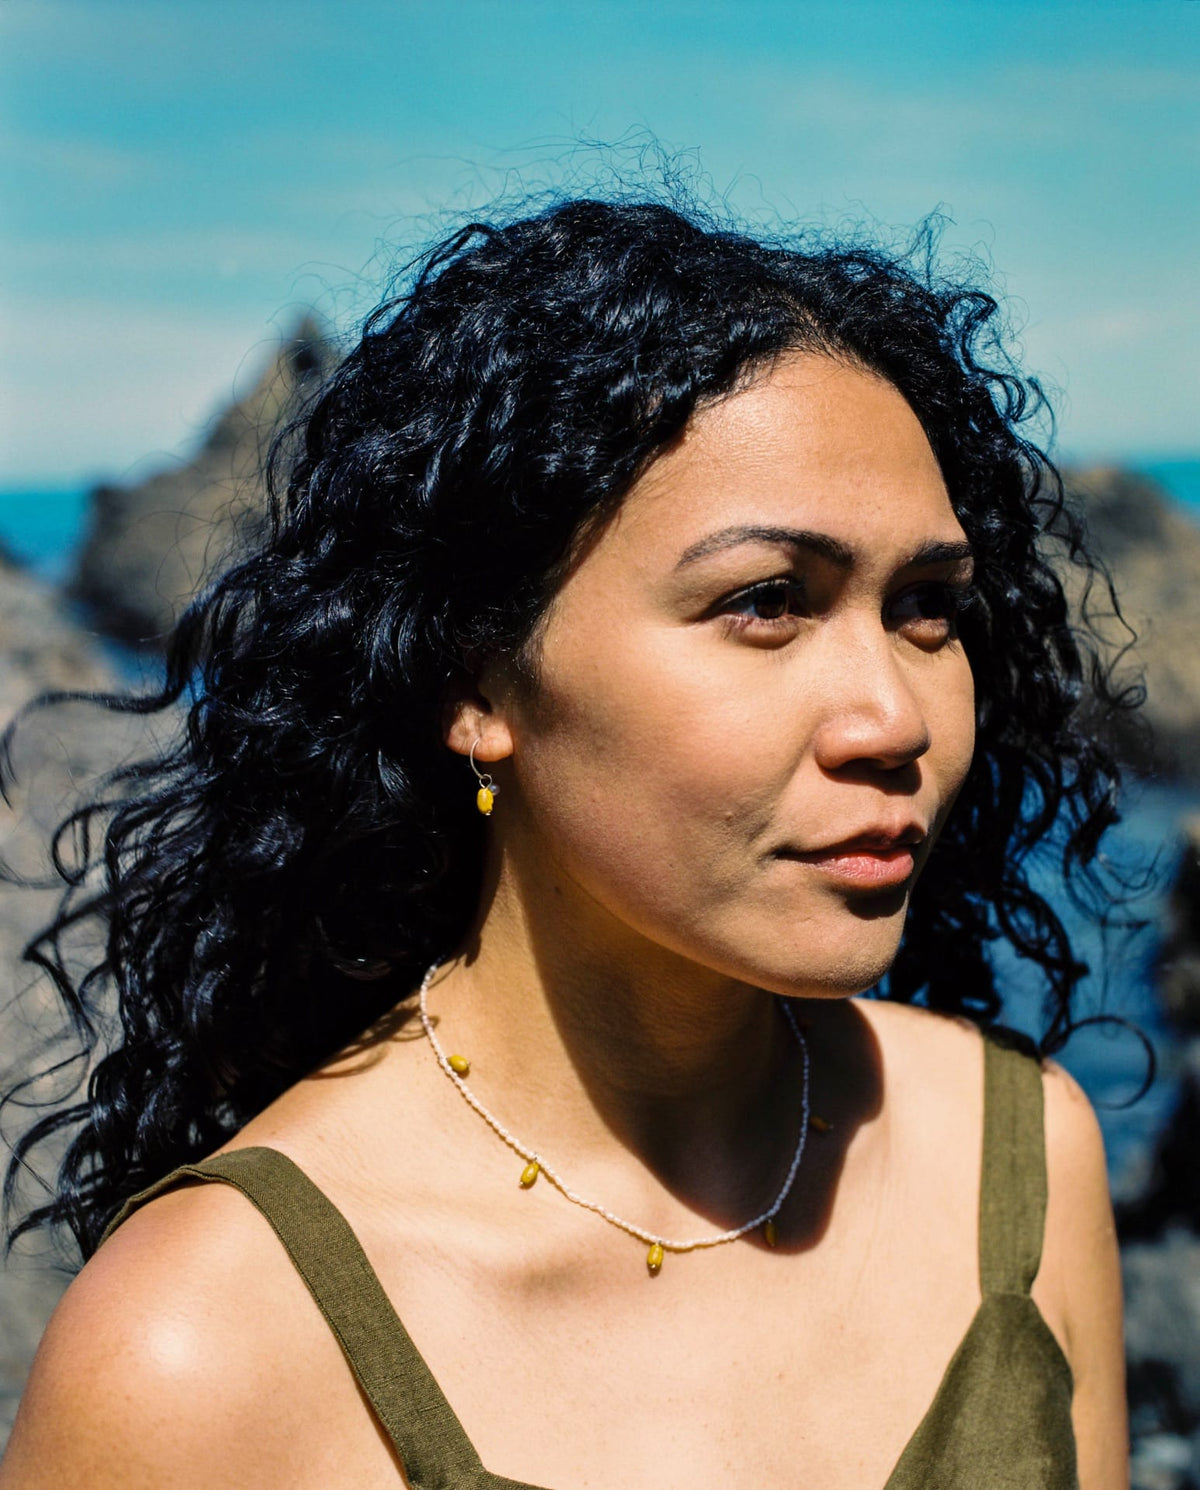 A woman with curly hair standing in front of the ocean wearing the Kōwhai Seed Pearl Necklace by Avara Studio.